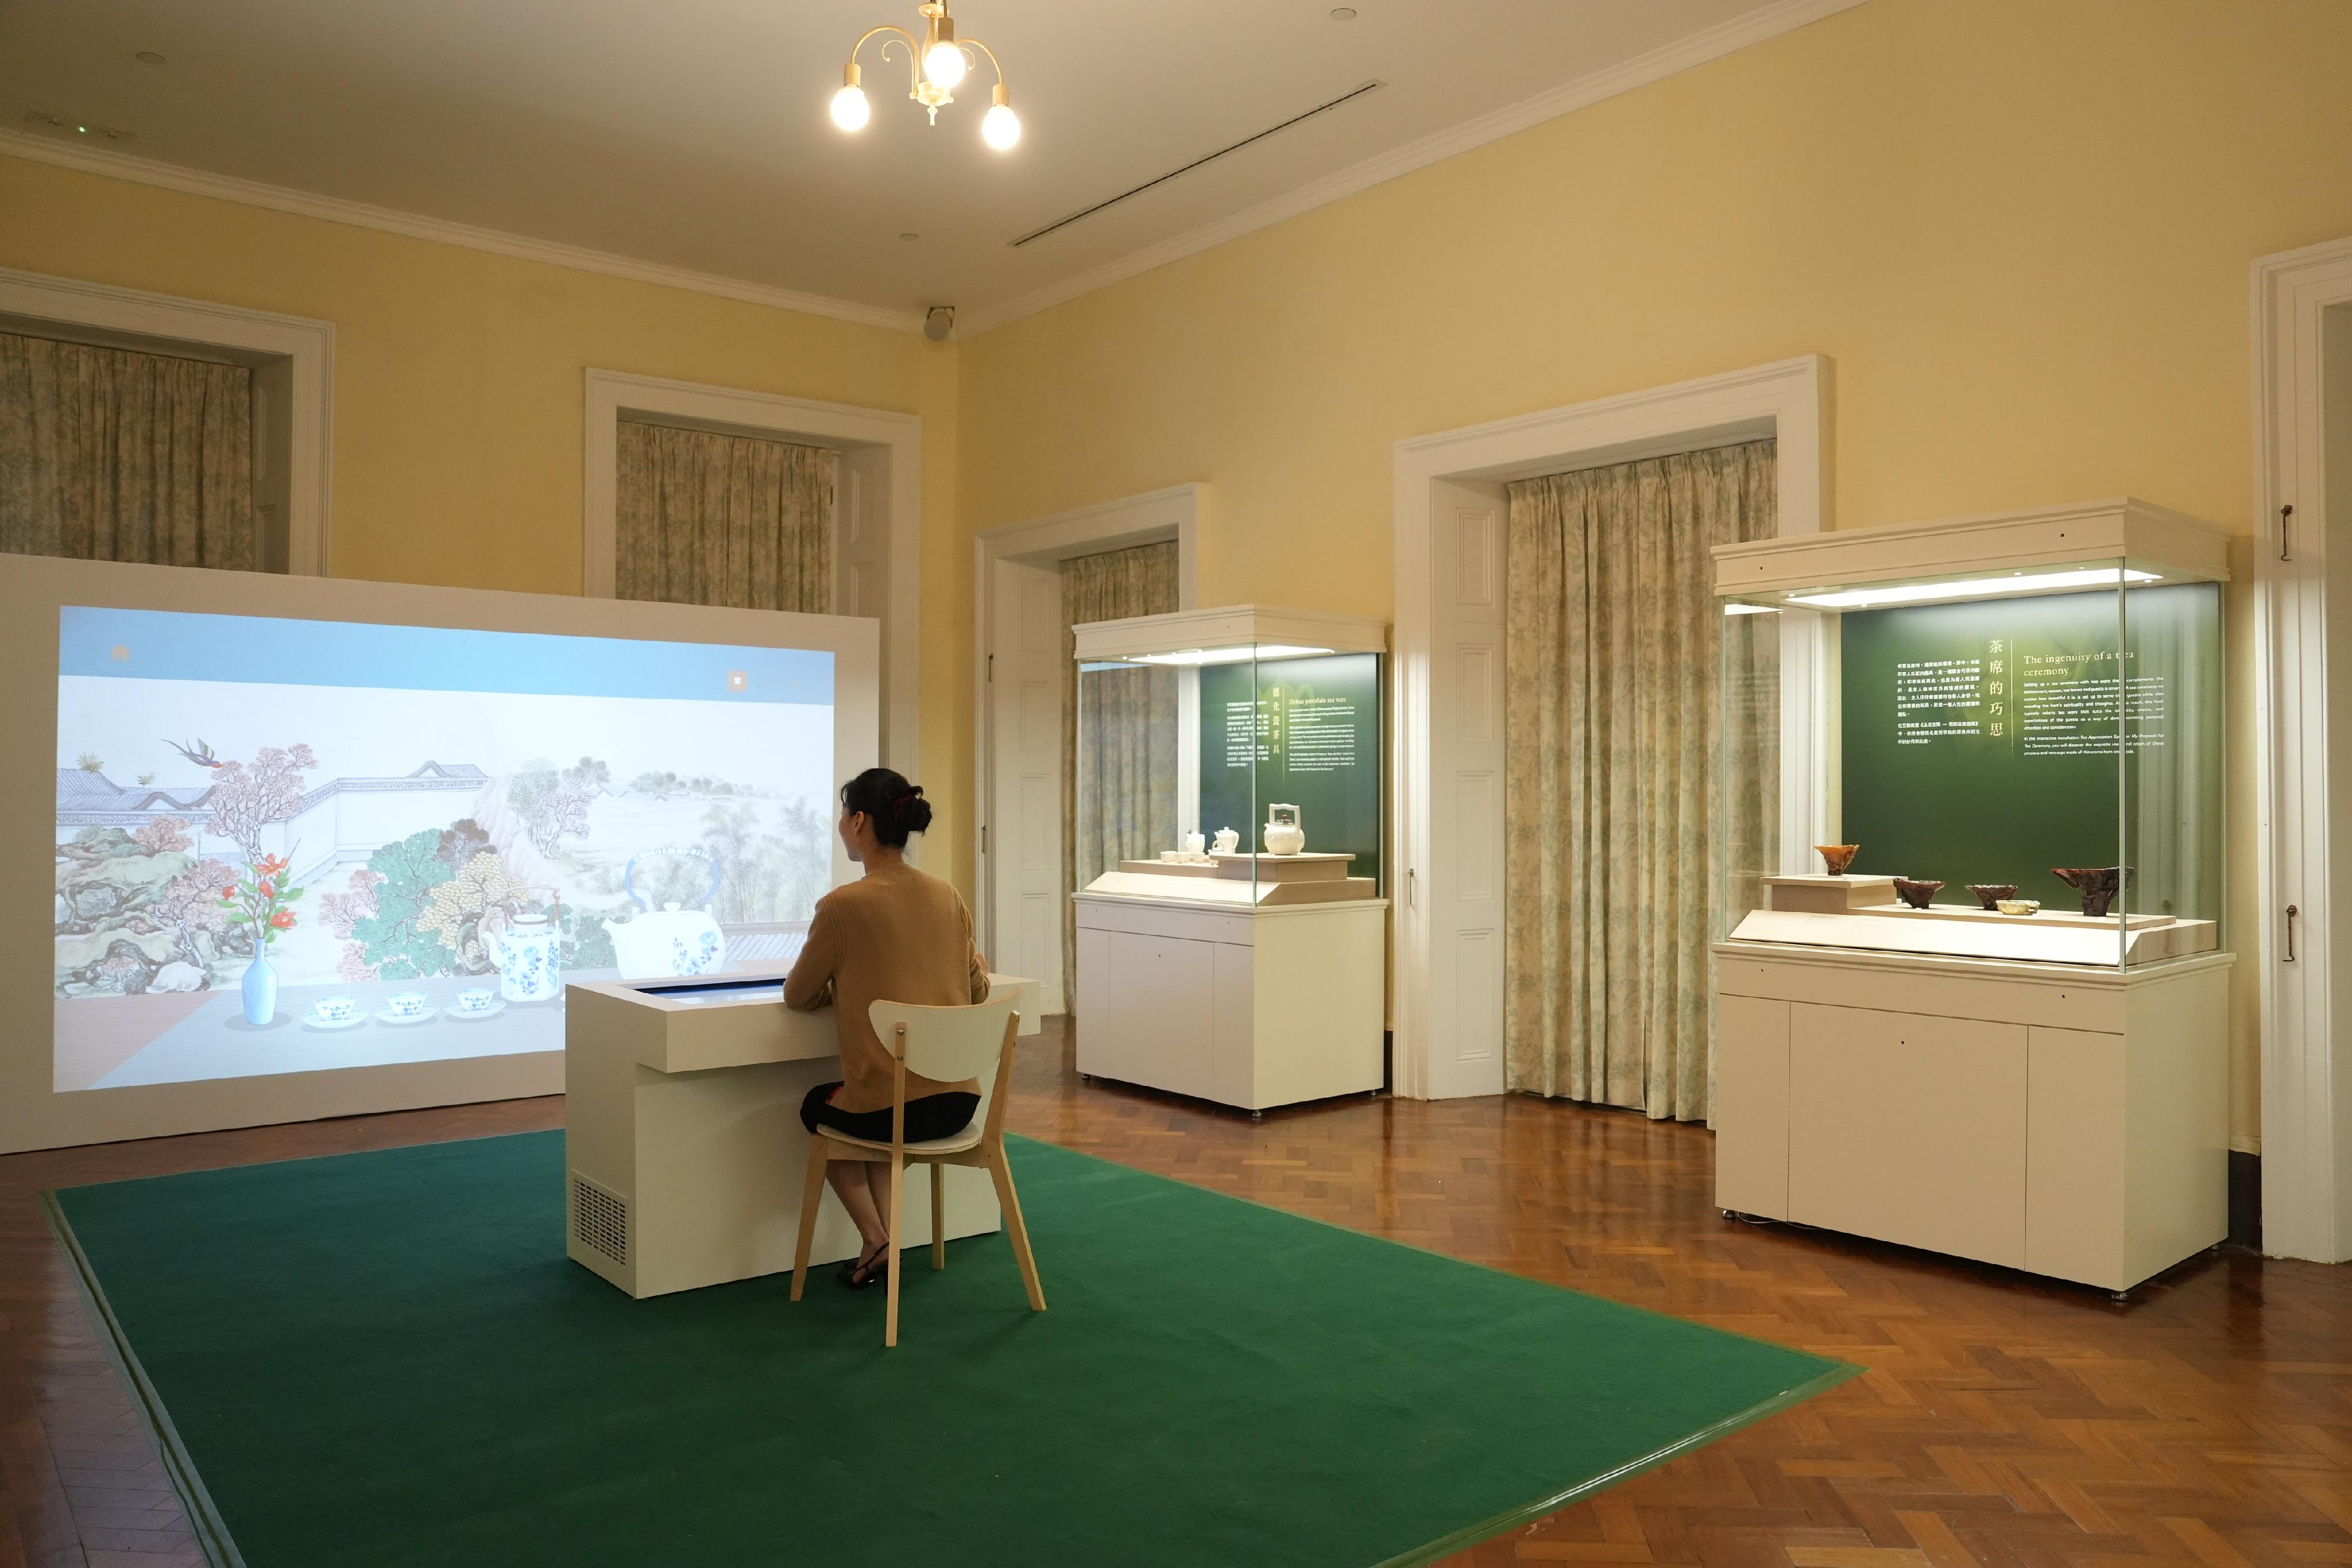 The Flagstaff House Museum of Tea Ware today (August 2) stages the exhibition "The Art of Living: Stationery and Tea Accessories of the Chinese Literati". Picture shows an interactive installation titled "Tea Appreciation Space: My Proposal for Tea Ceremony". Visitors can learn about the basic setup of a Chinese tea ceremony and create their own design of tea ceremony, to experience the charm of Chinese tea culture and enjoy the elegance of tea appreciation.